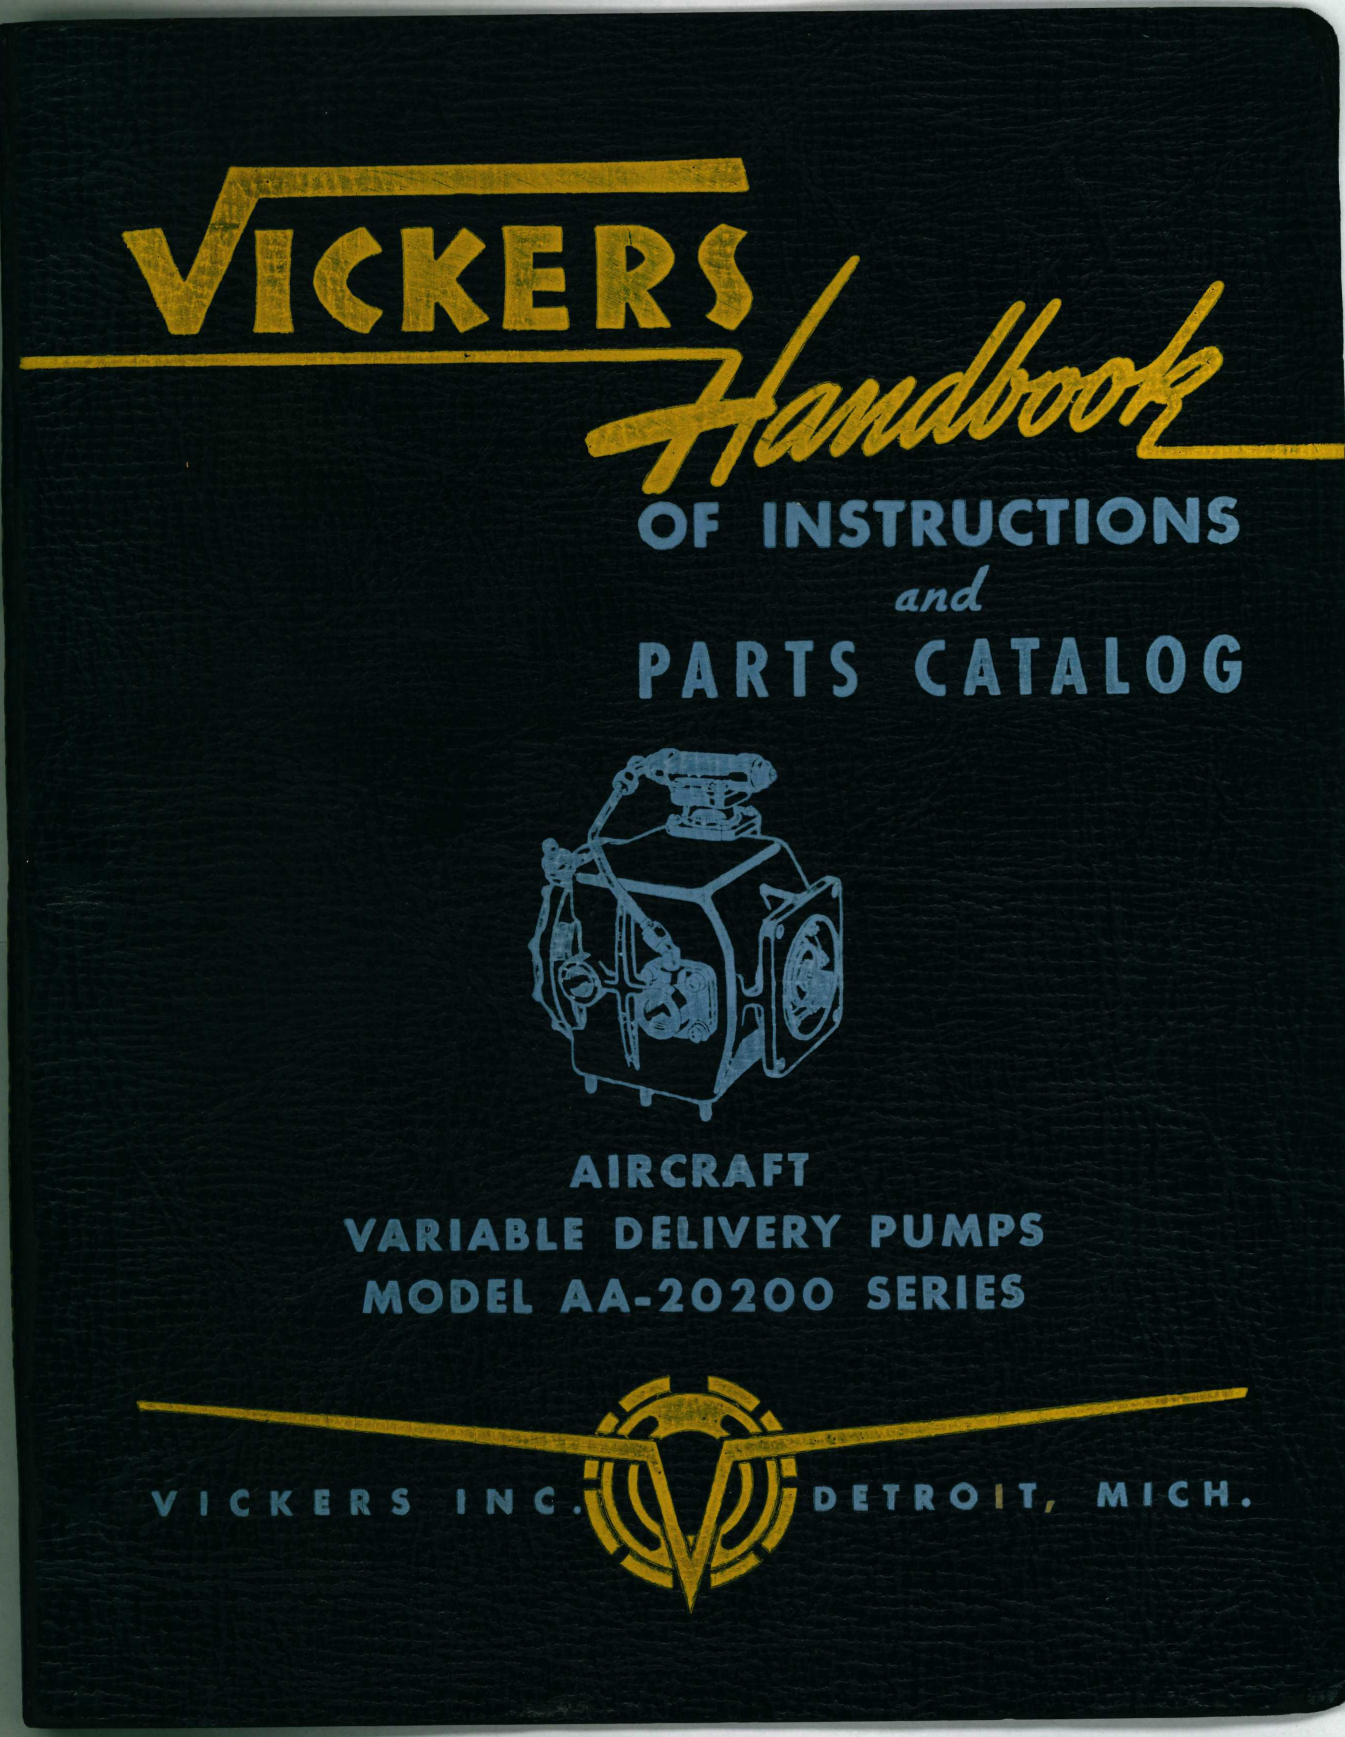 Sample page 1 from AirCorps Library document: Handbook of Instructions with Parts Catalog for Variable Delivery Pumps AA-20200 Series